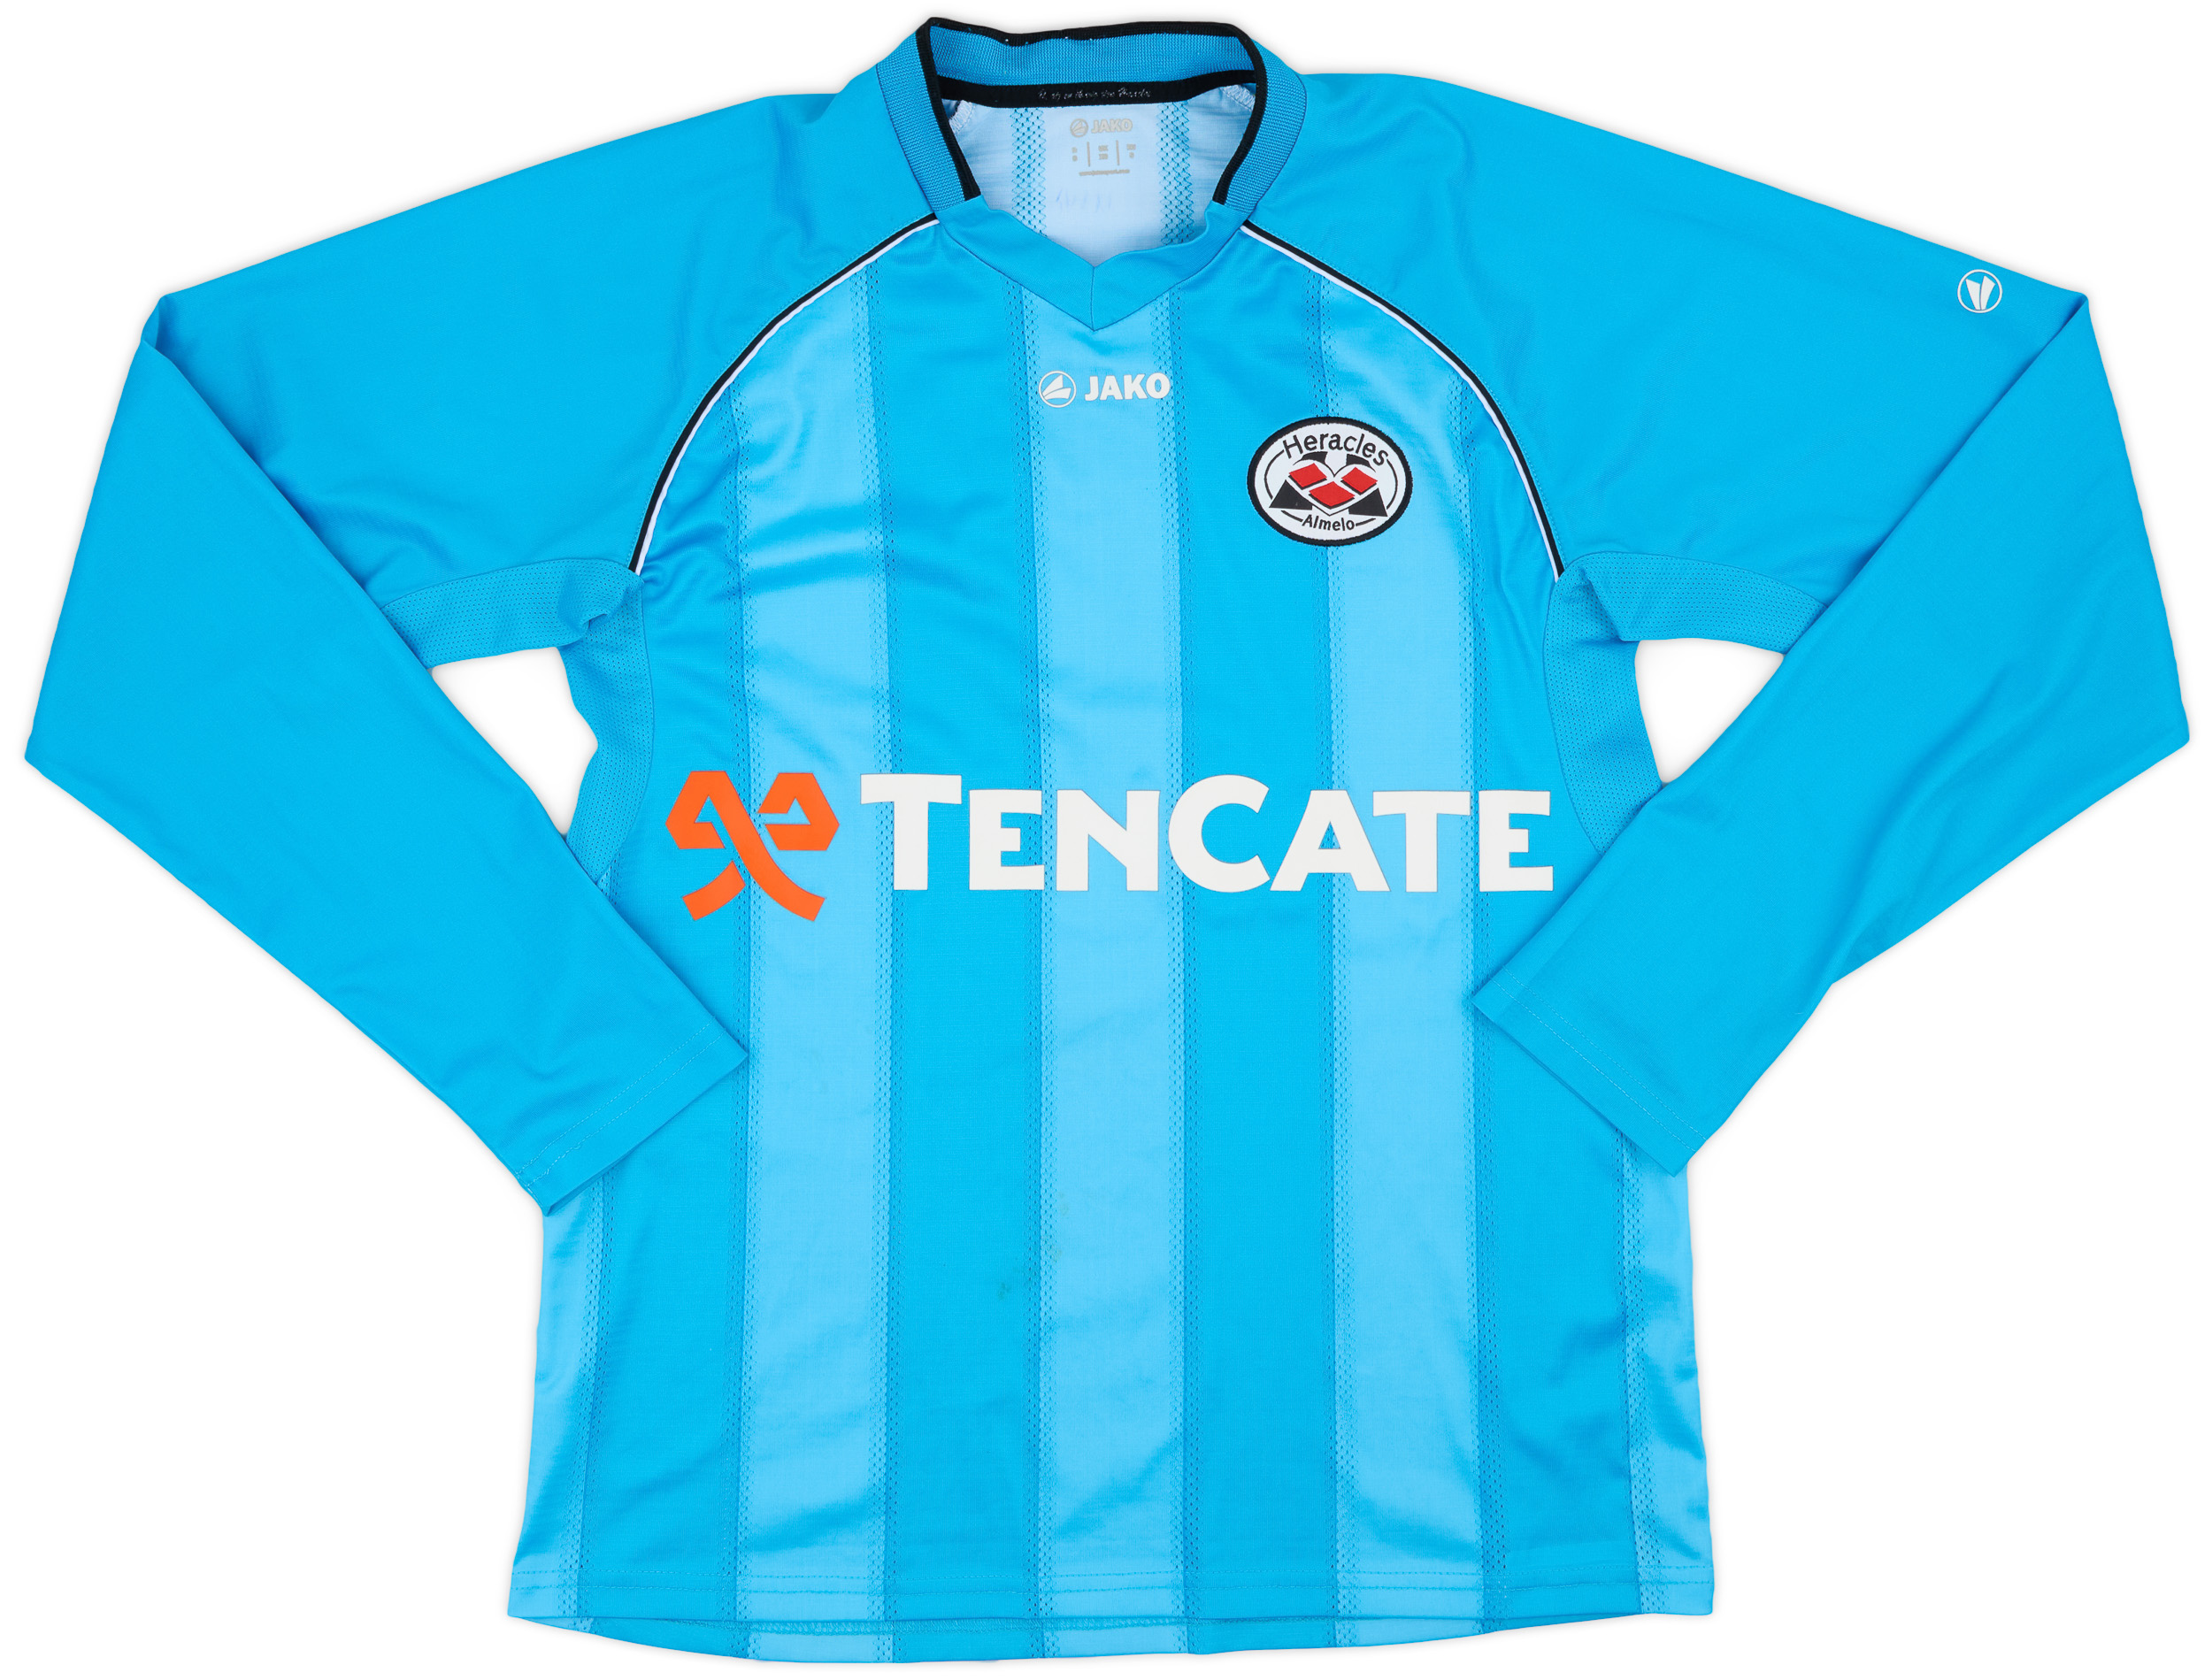 2011-12 Heracles Almelo Away Shirt - 7/10 - ()